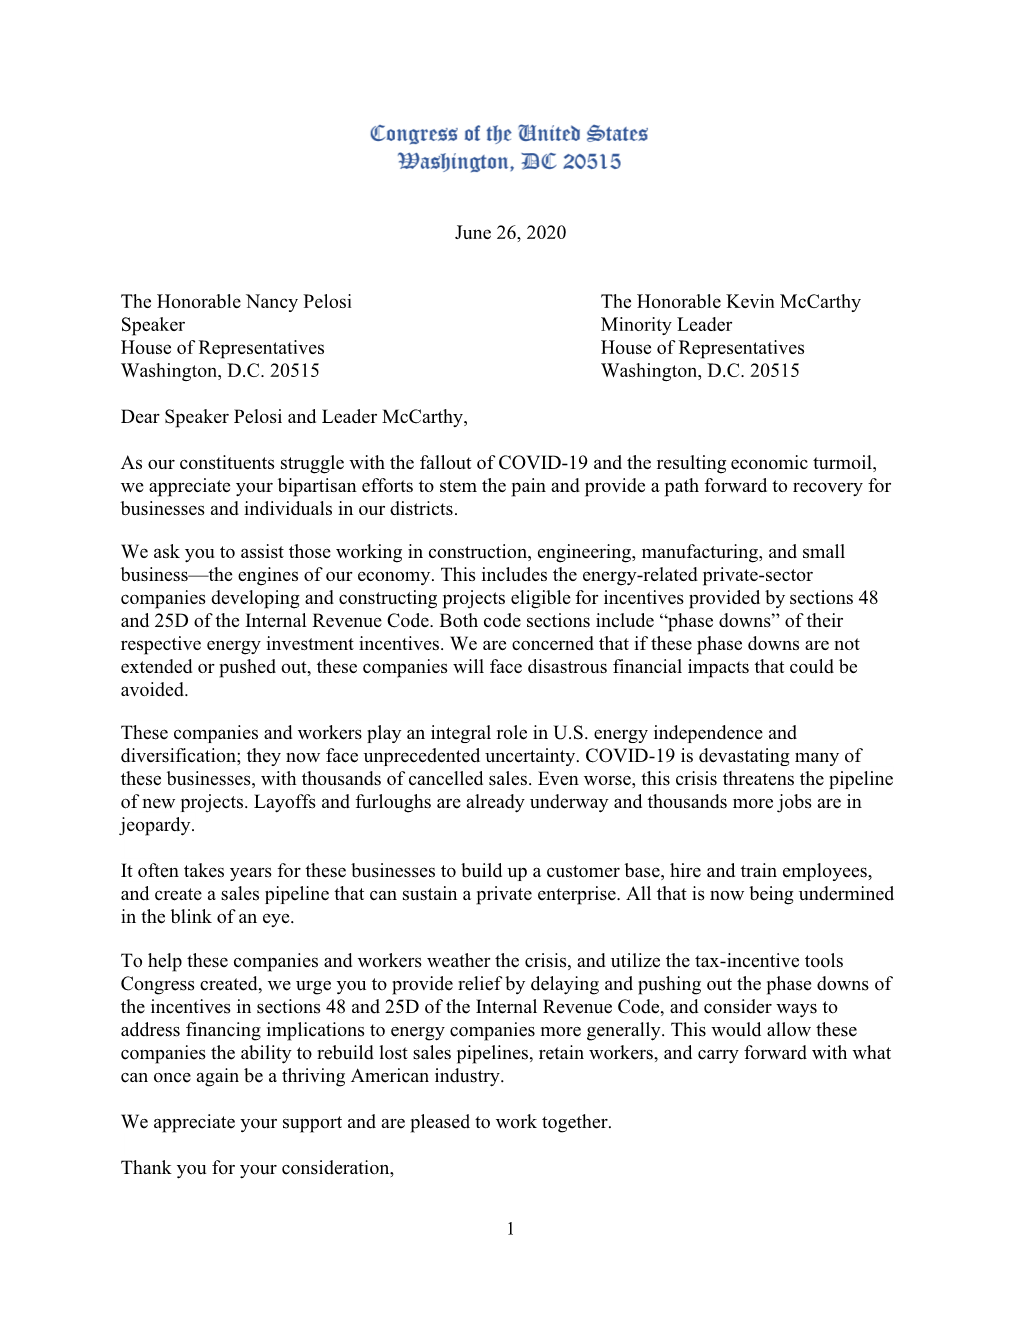 Letter from Congress to Speaker Pelosi and Leader Mccarthy, Urging